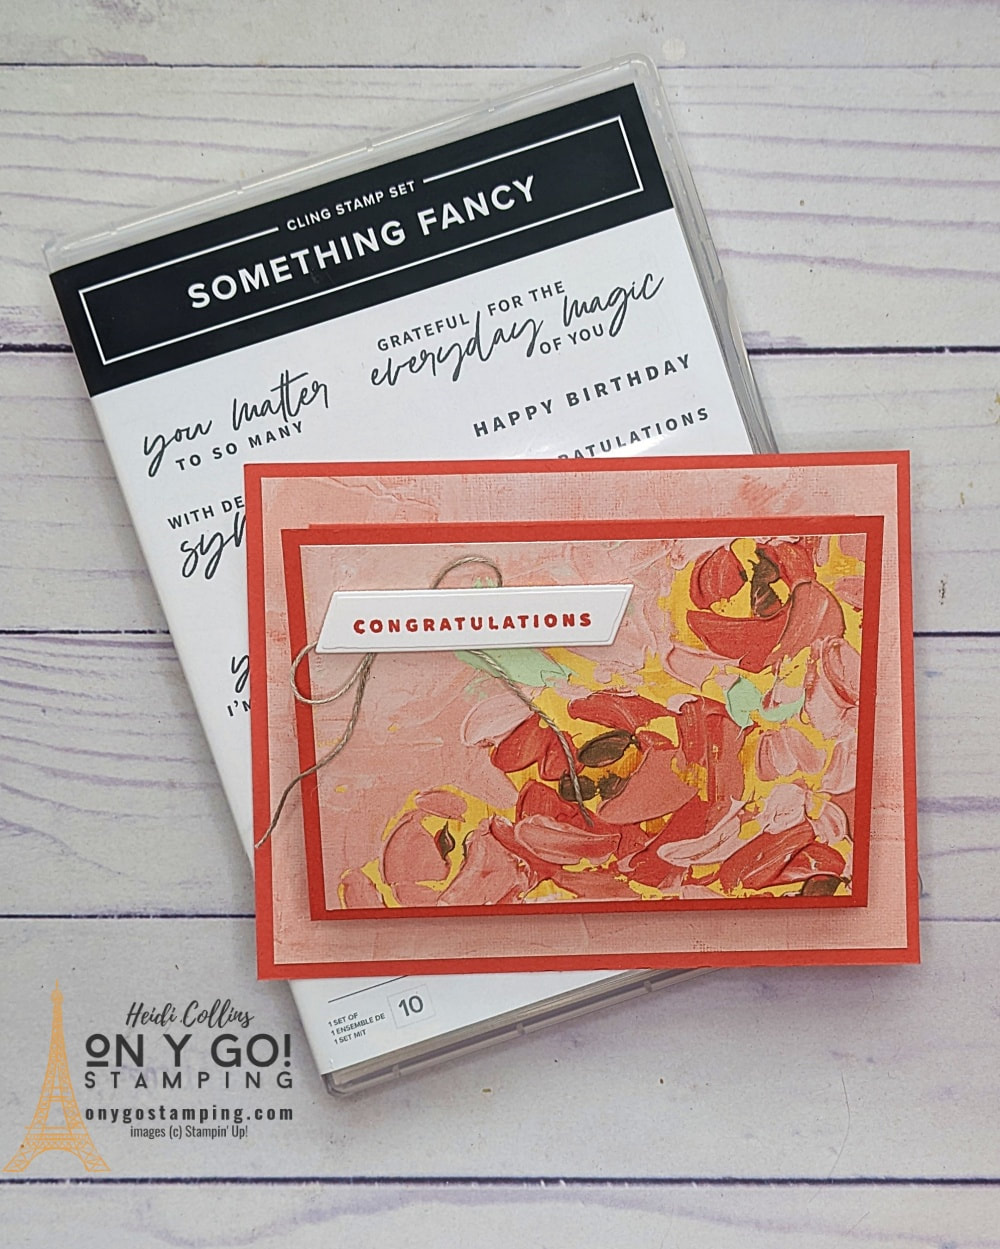 This beautiful wedding card is a handmade fun fold card that also has a gift card holder. I created it with the NEW Something Fancy stamp set and Fancy Flora patterned paper from the 2023 January-April Mini Catalog from Stampin' Up!®